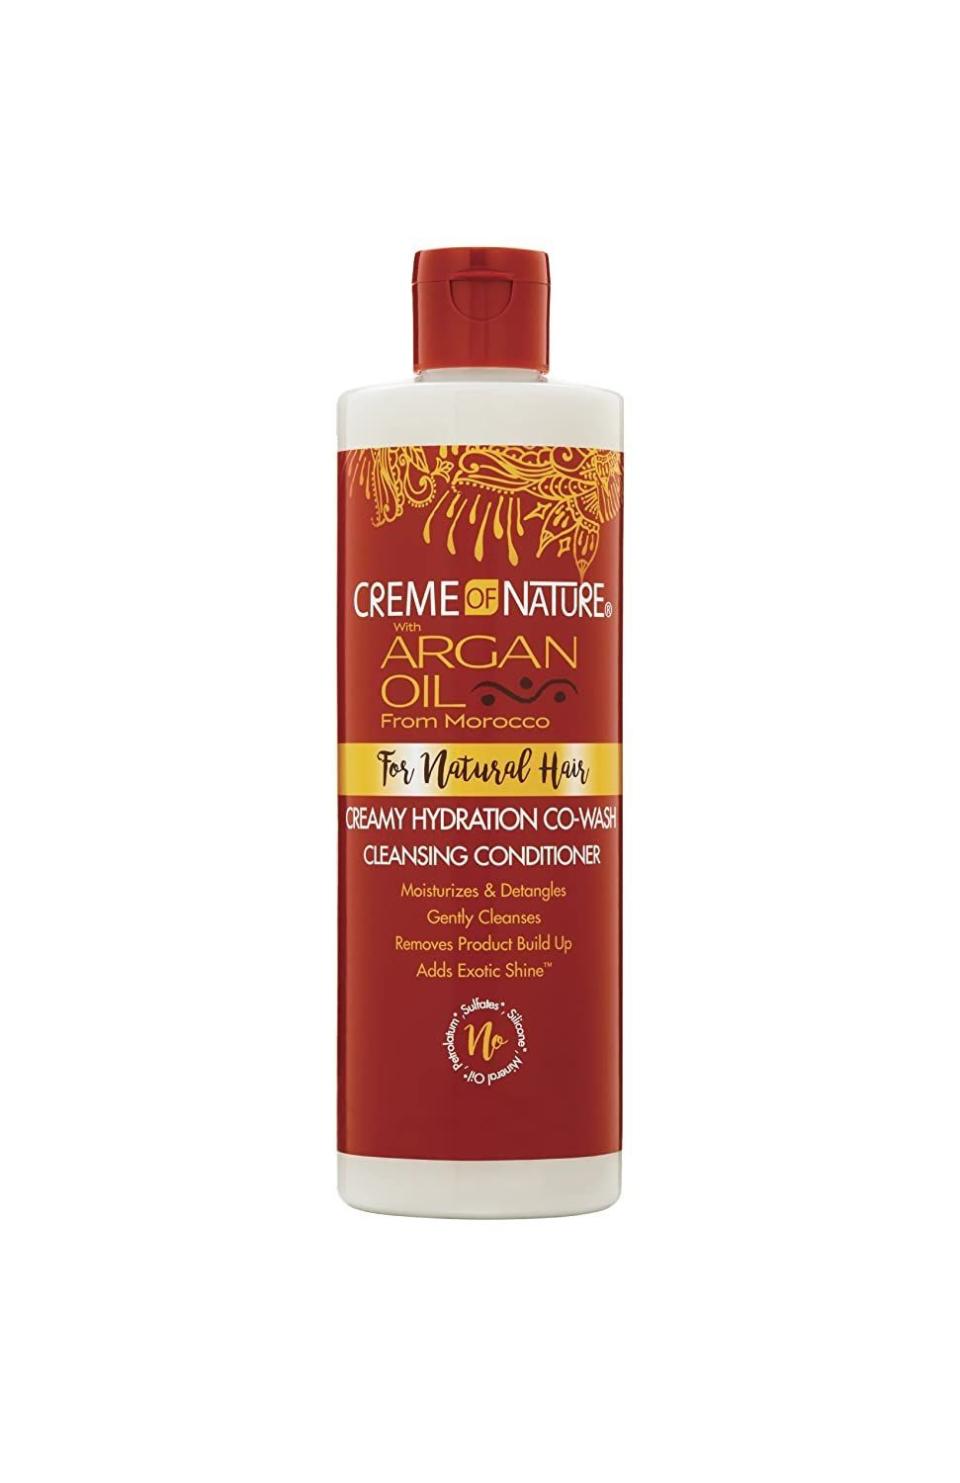 6) Creme of Nature Argan Oil Hair Cleansing Conditioner